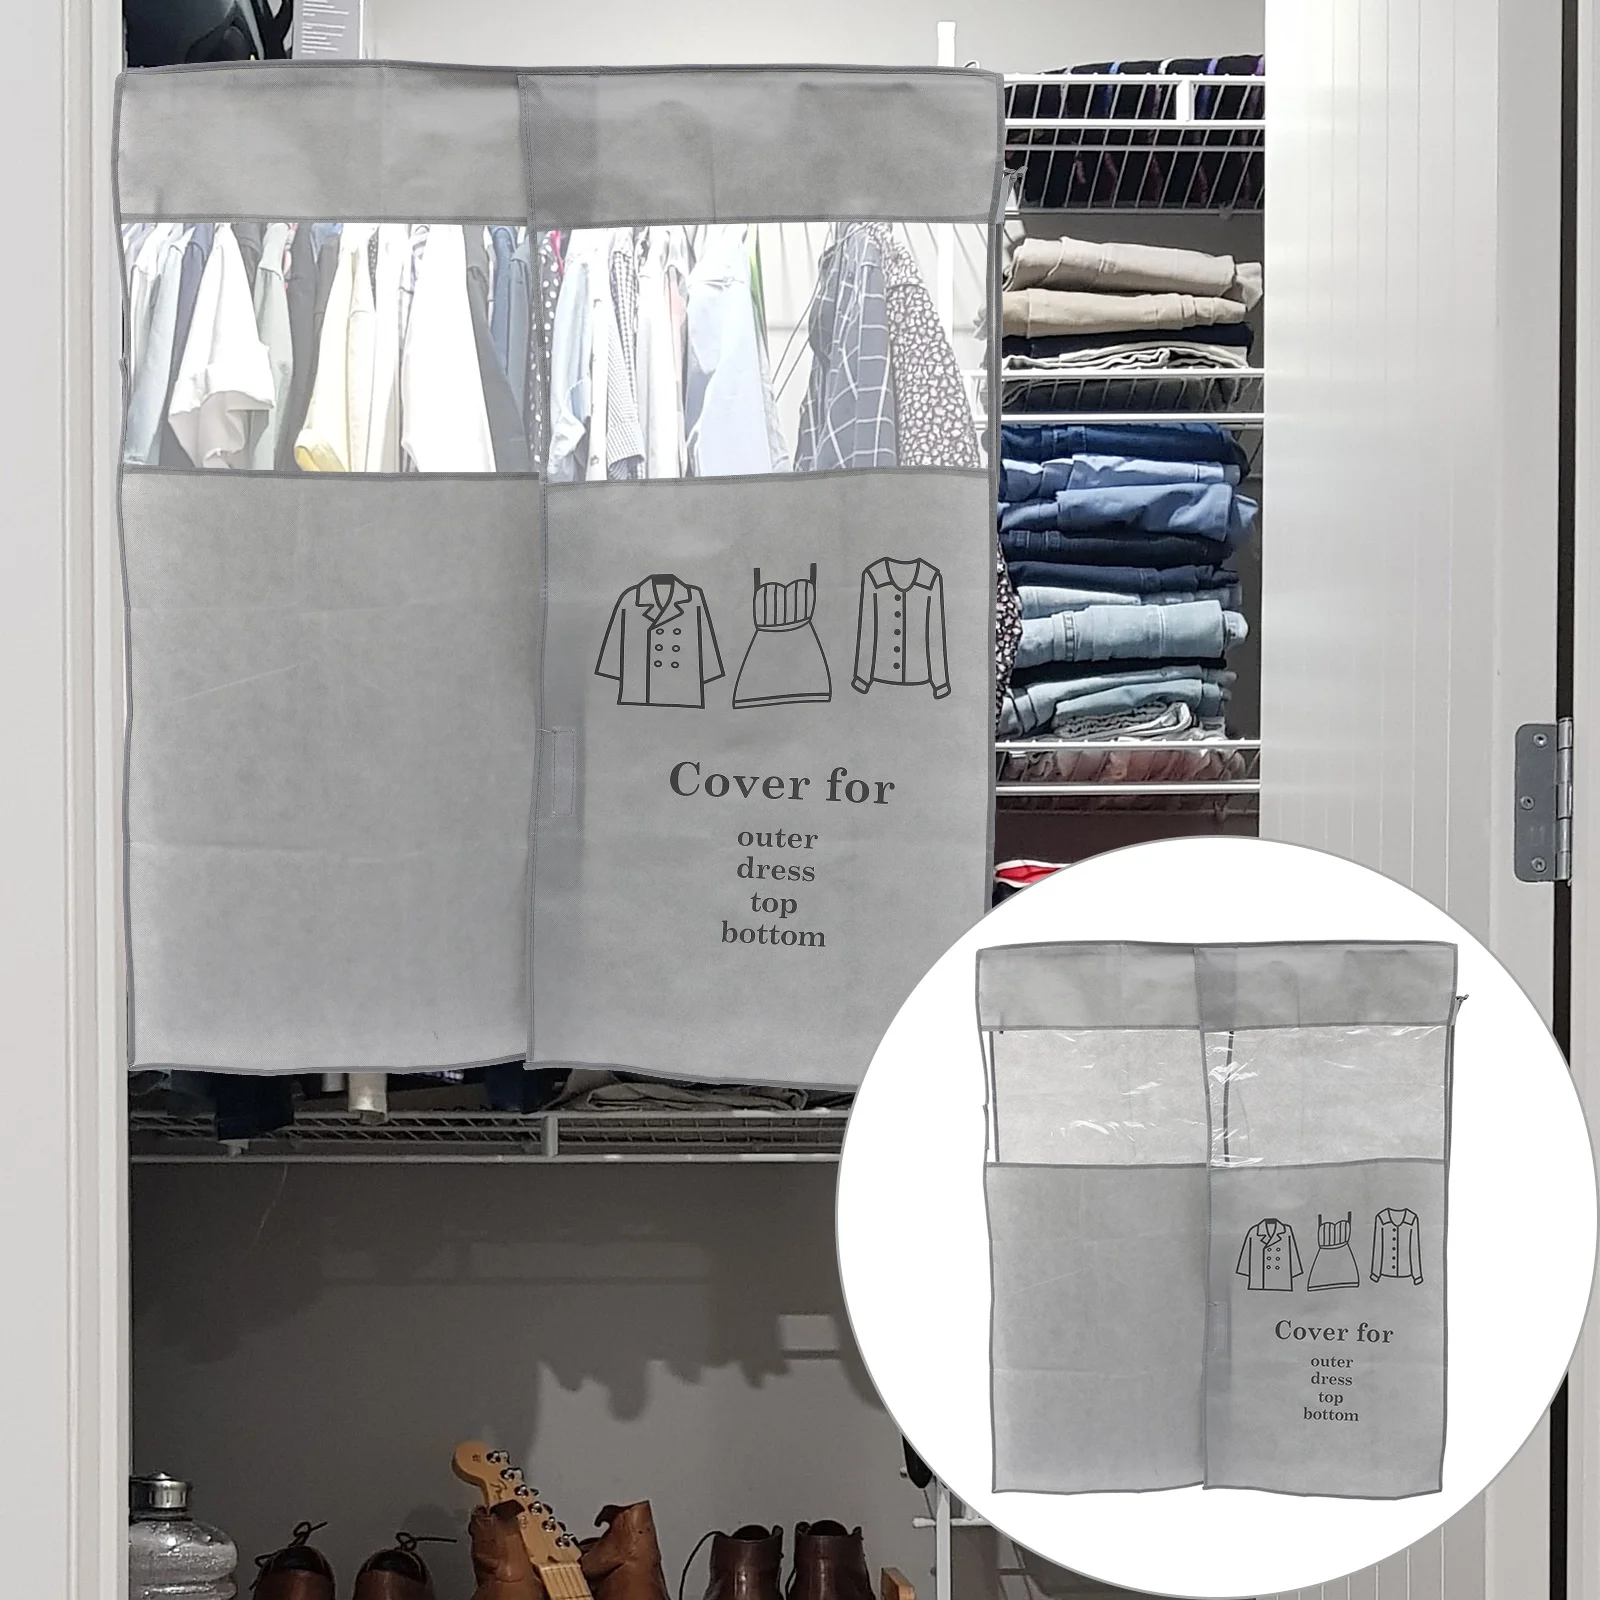 

Garment Bags for Hanging Clothes, 43 7 Clear Hanging Garment Bags for Closet Storage Bottom Enclosed Garment Rack Cover Sealed